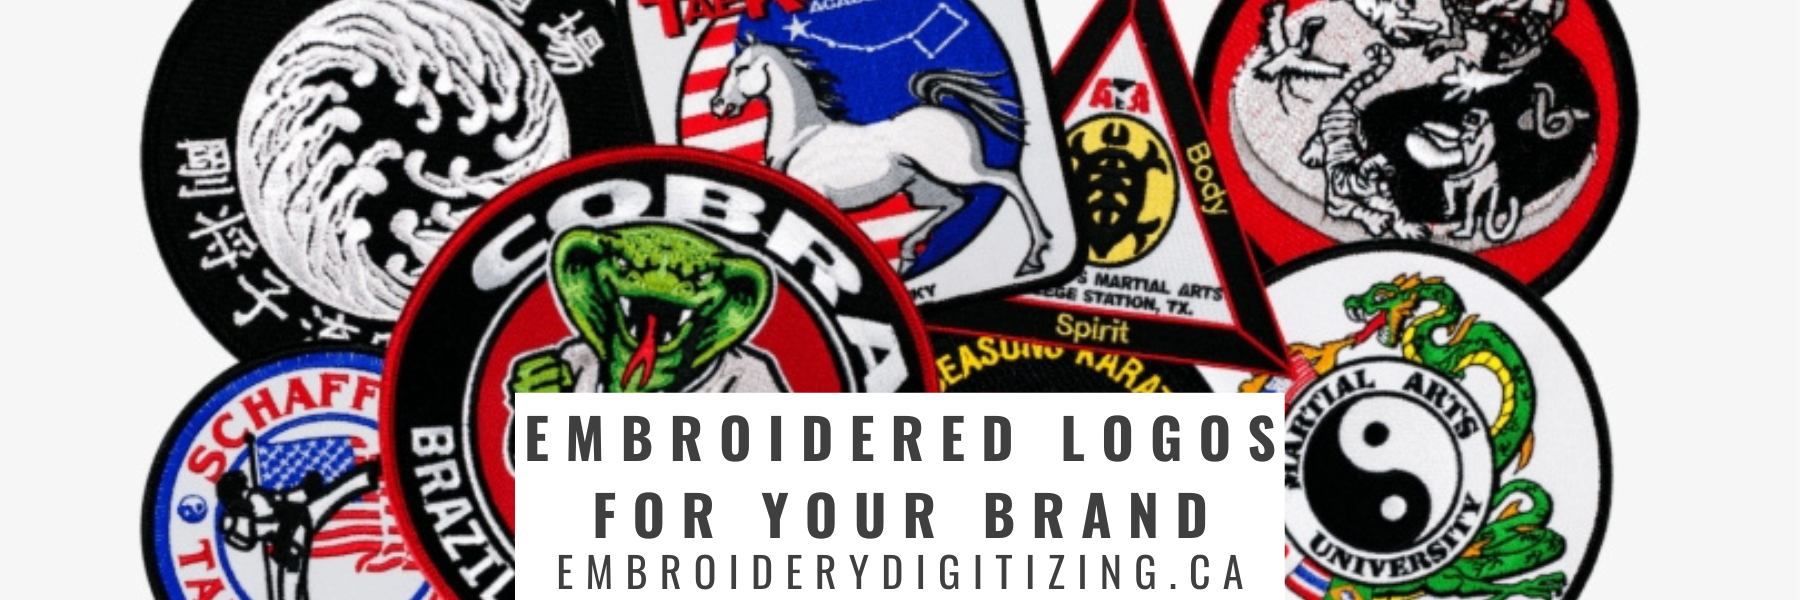 Embroidered Logos For Your Brand